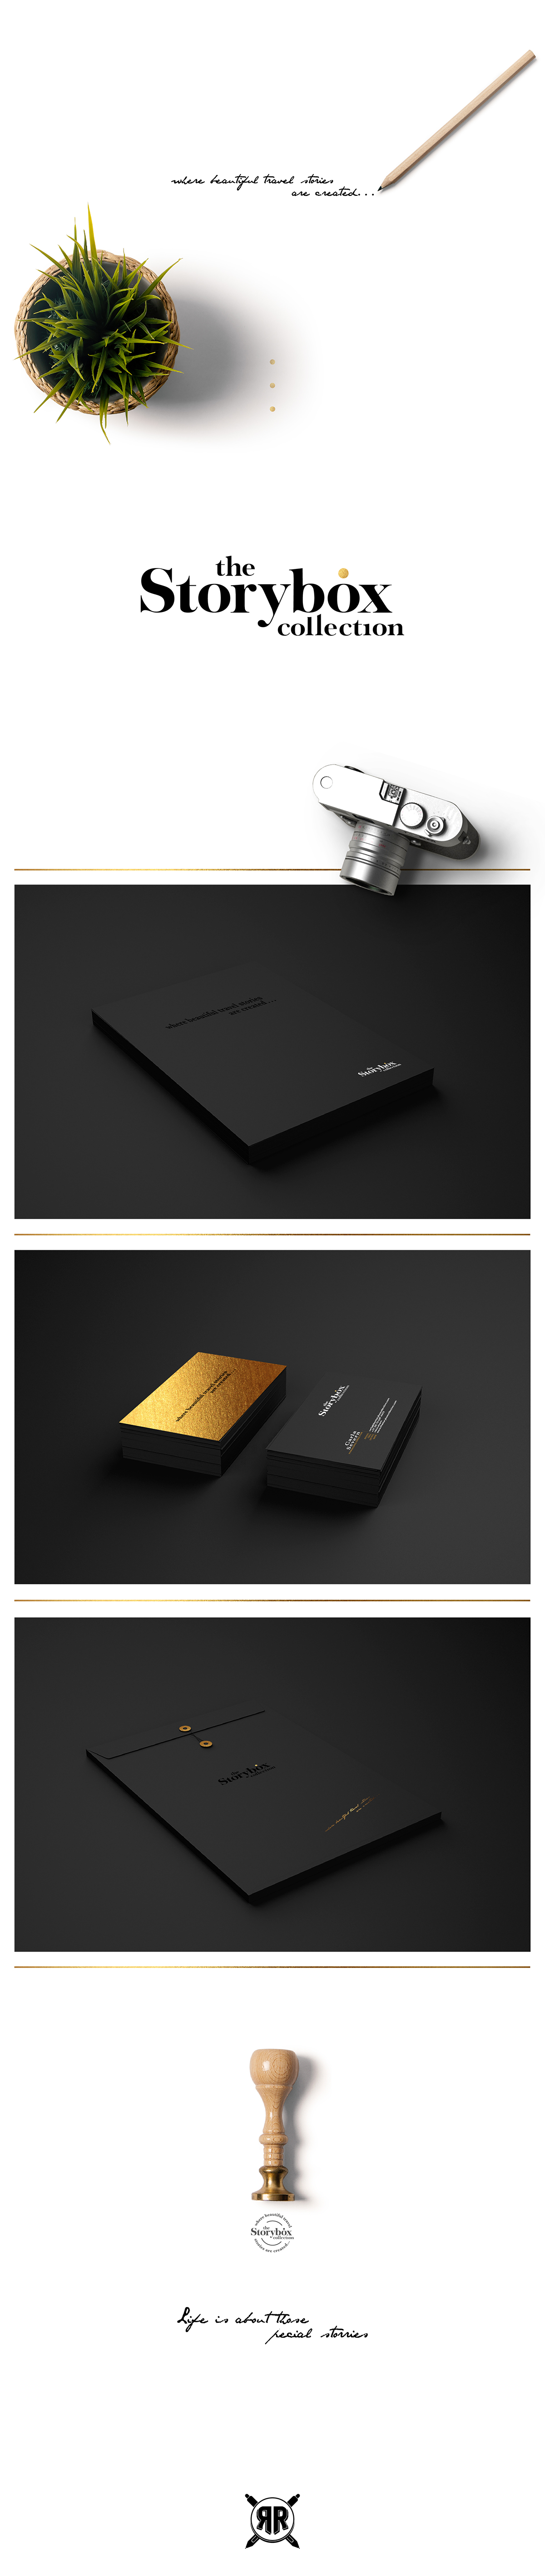 logo design story box Collection corporate identity gold black Beautiful amazing Love crafted Travel Stories